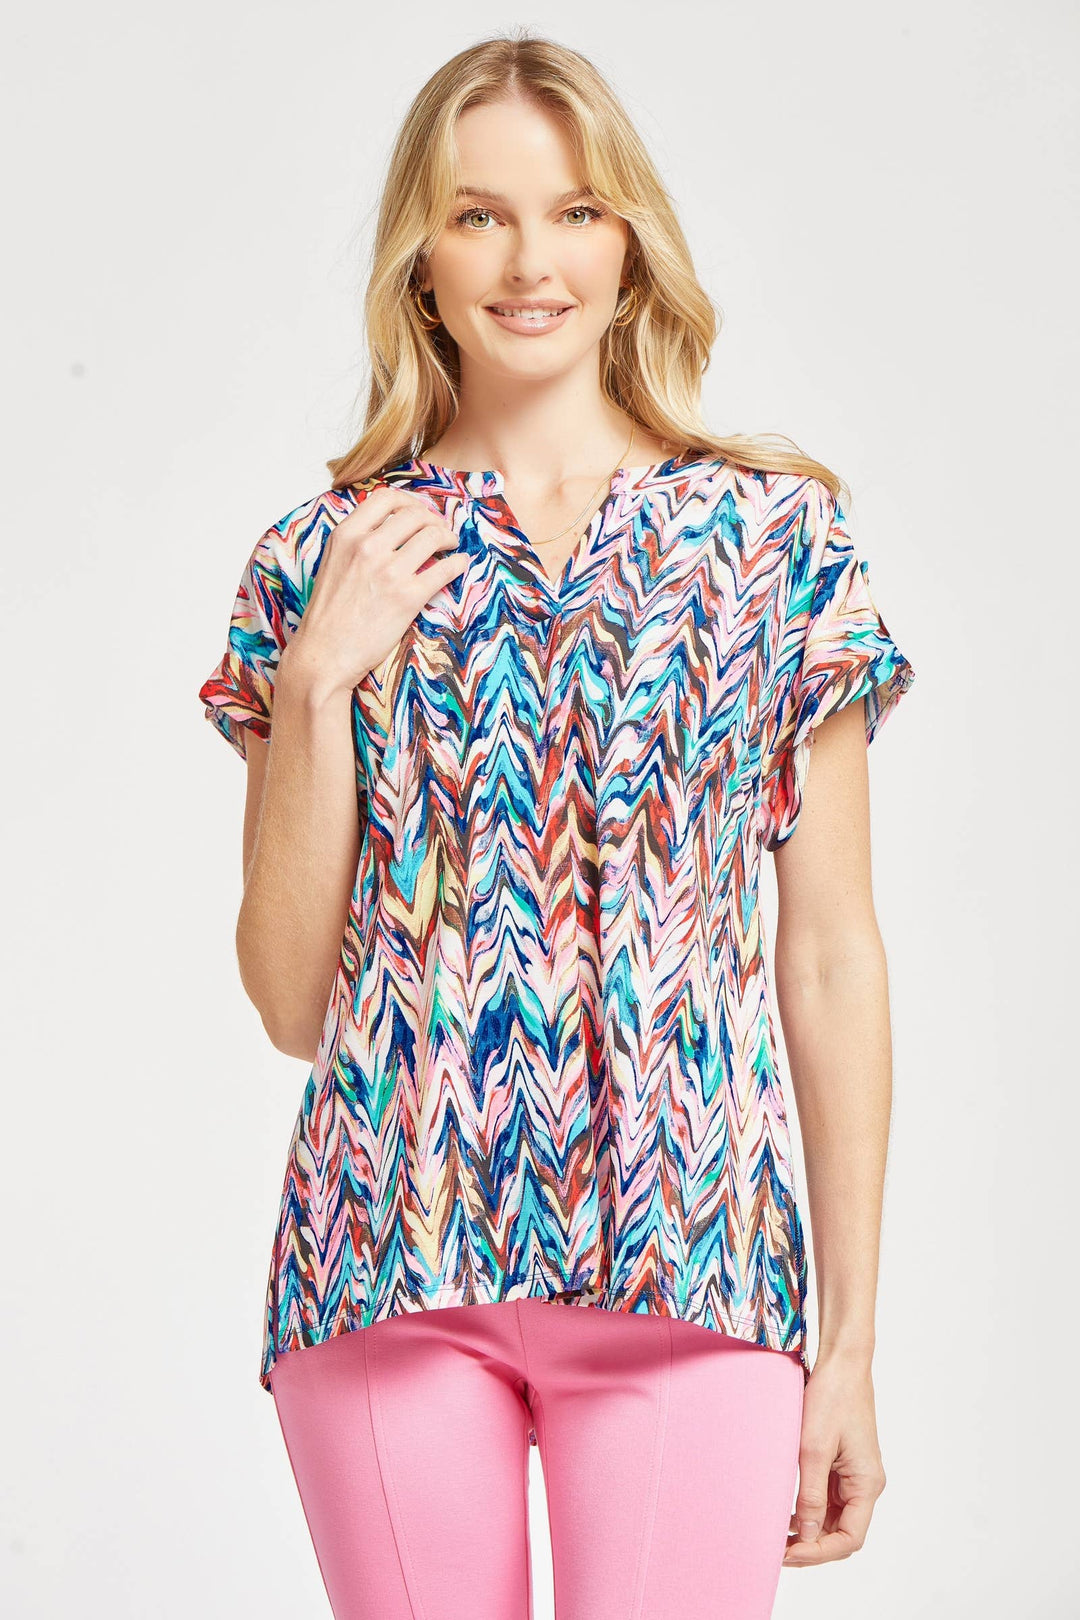 Lindzy Wrinkle Free Dolman Sleeve Top, ZigZag-Short Sleeve Tops-Inspired by Justeen-Women's Clothing Boutique in Chicago, Illinois